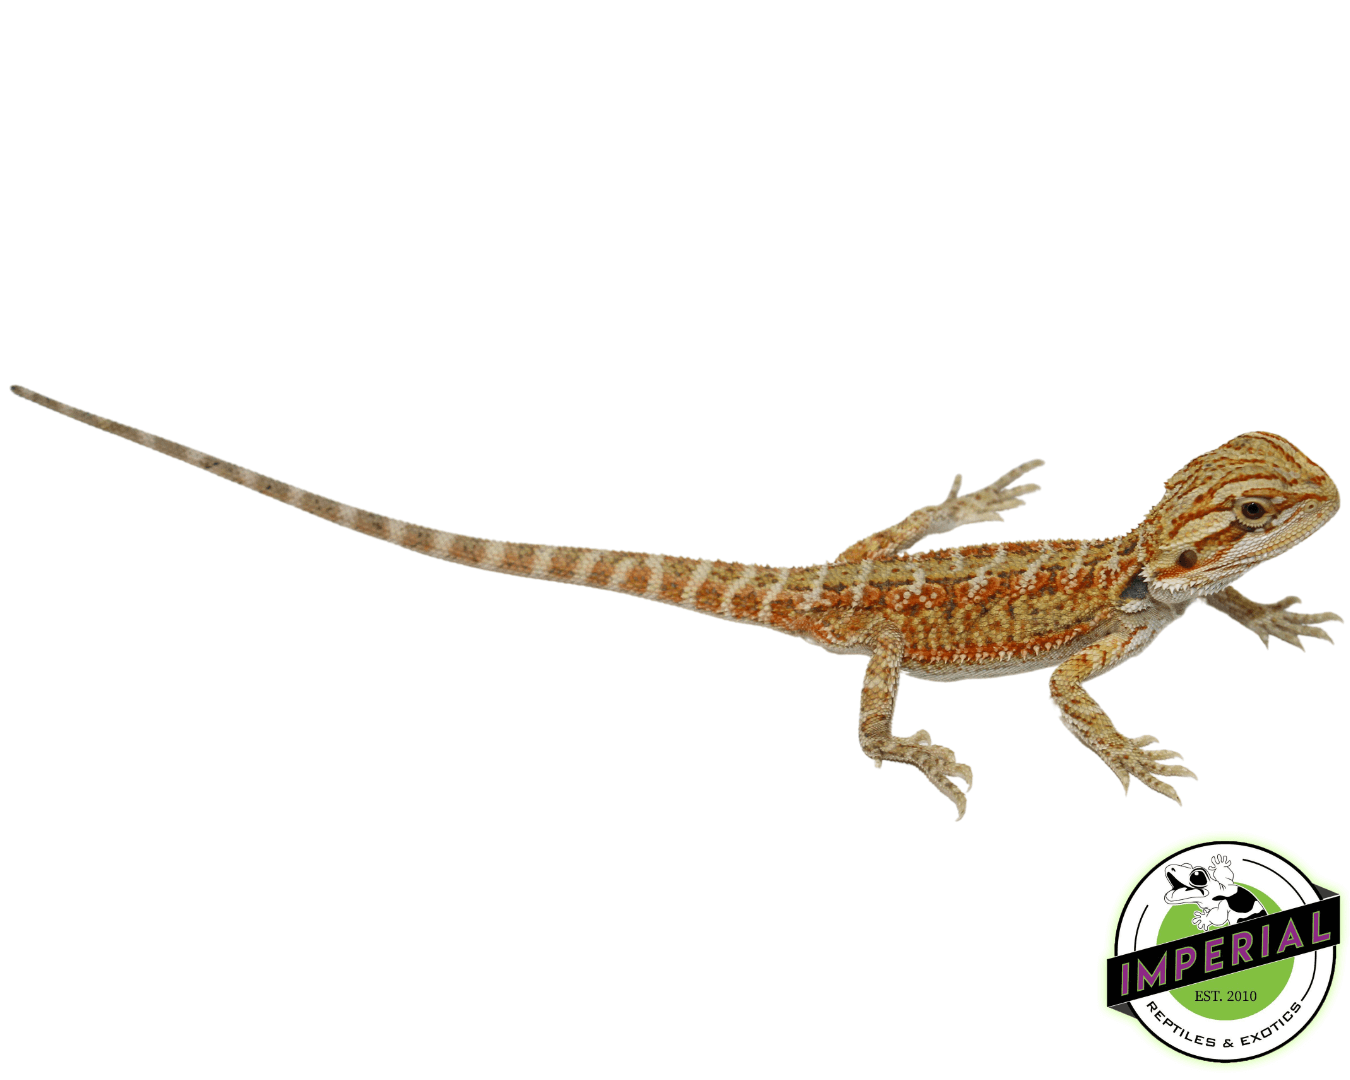 bearded dragon for sale, buy reptiles online